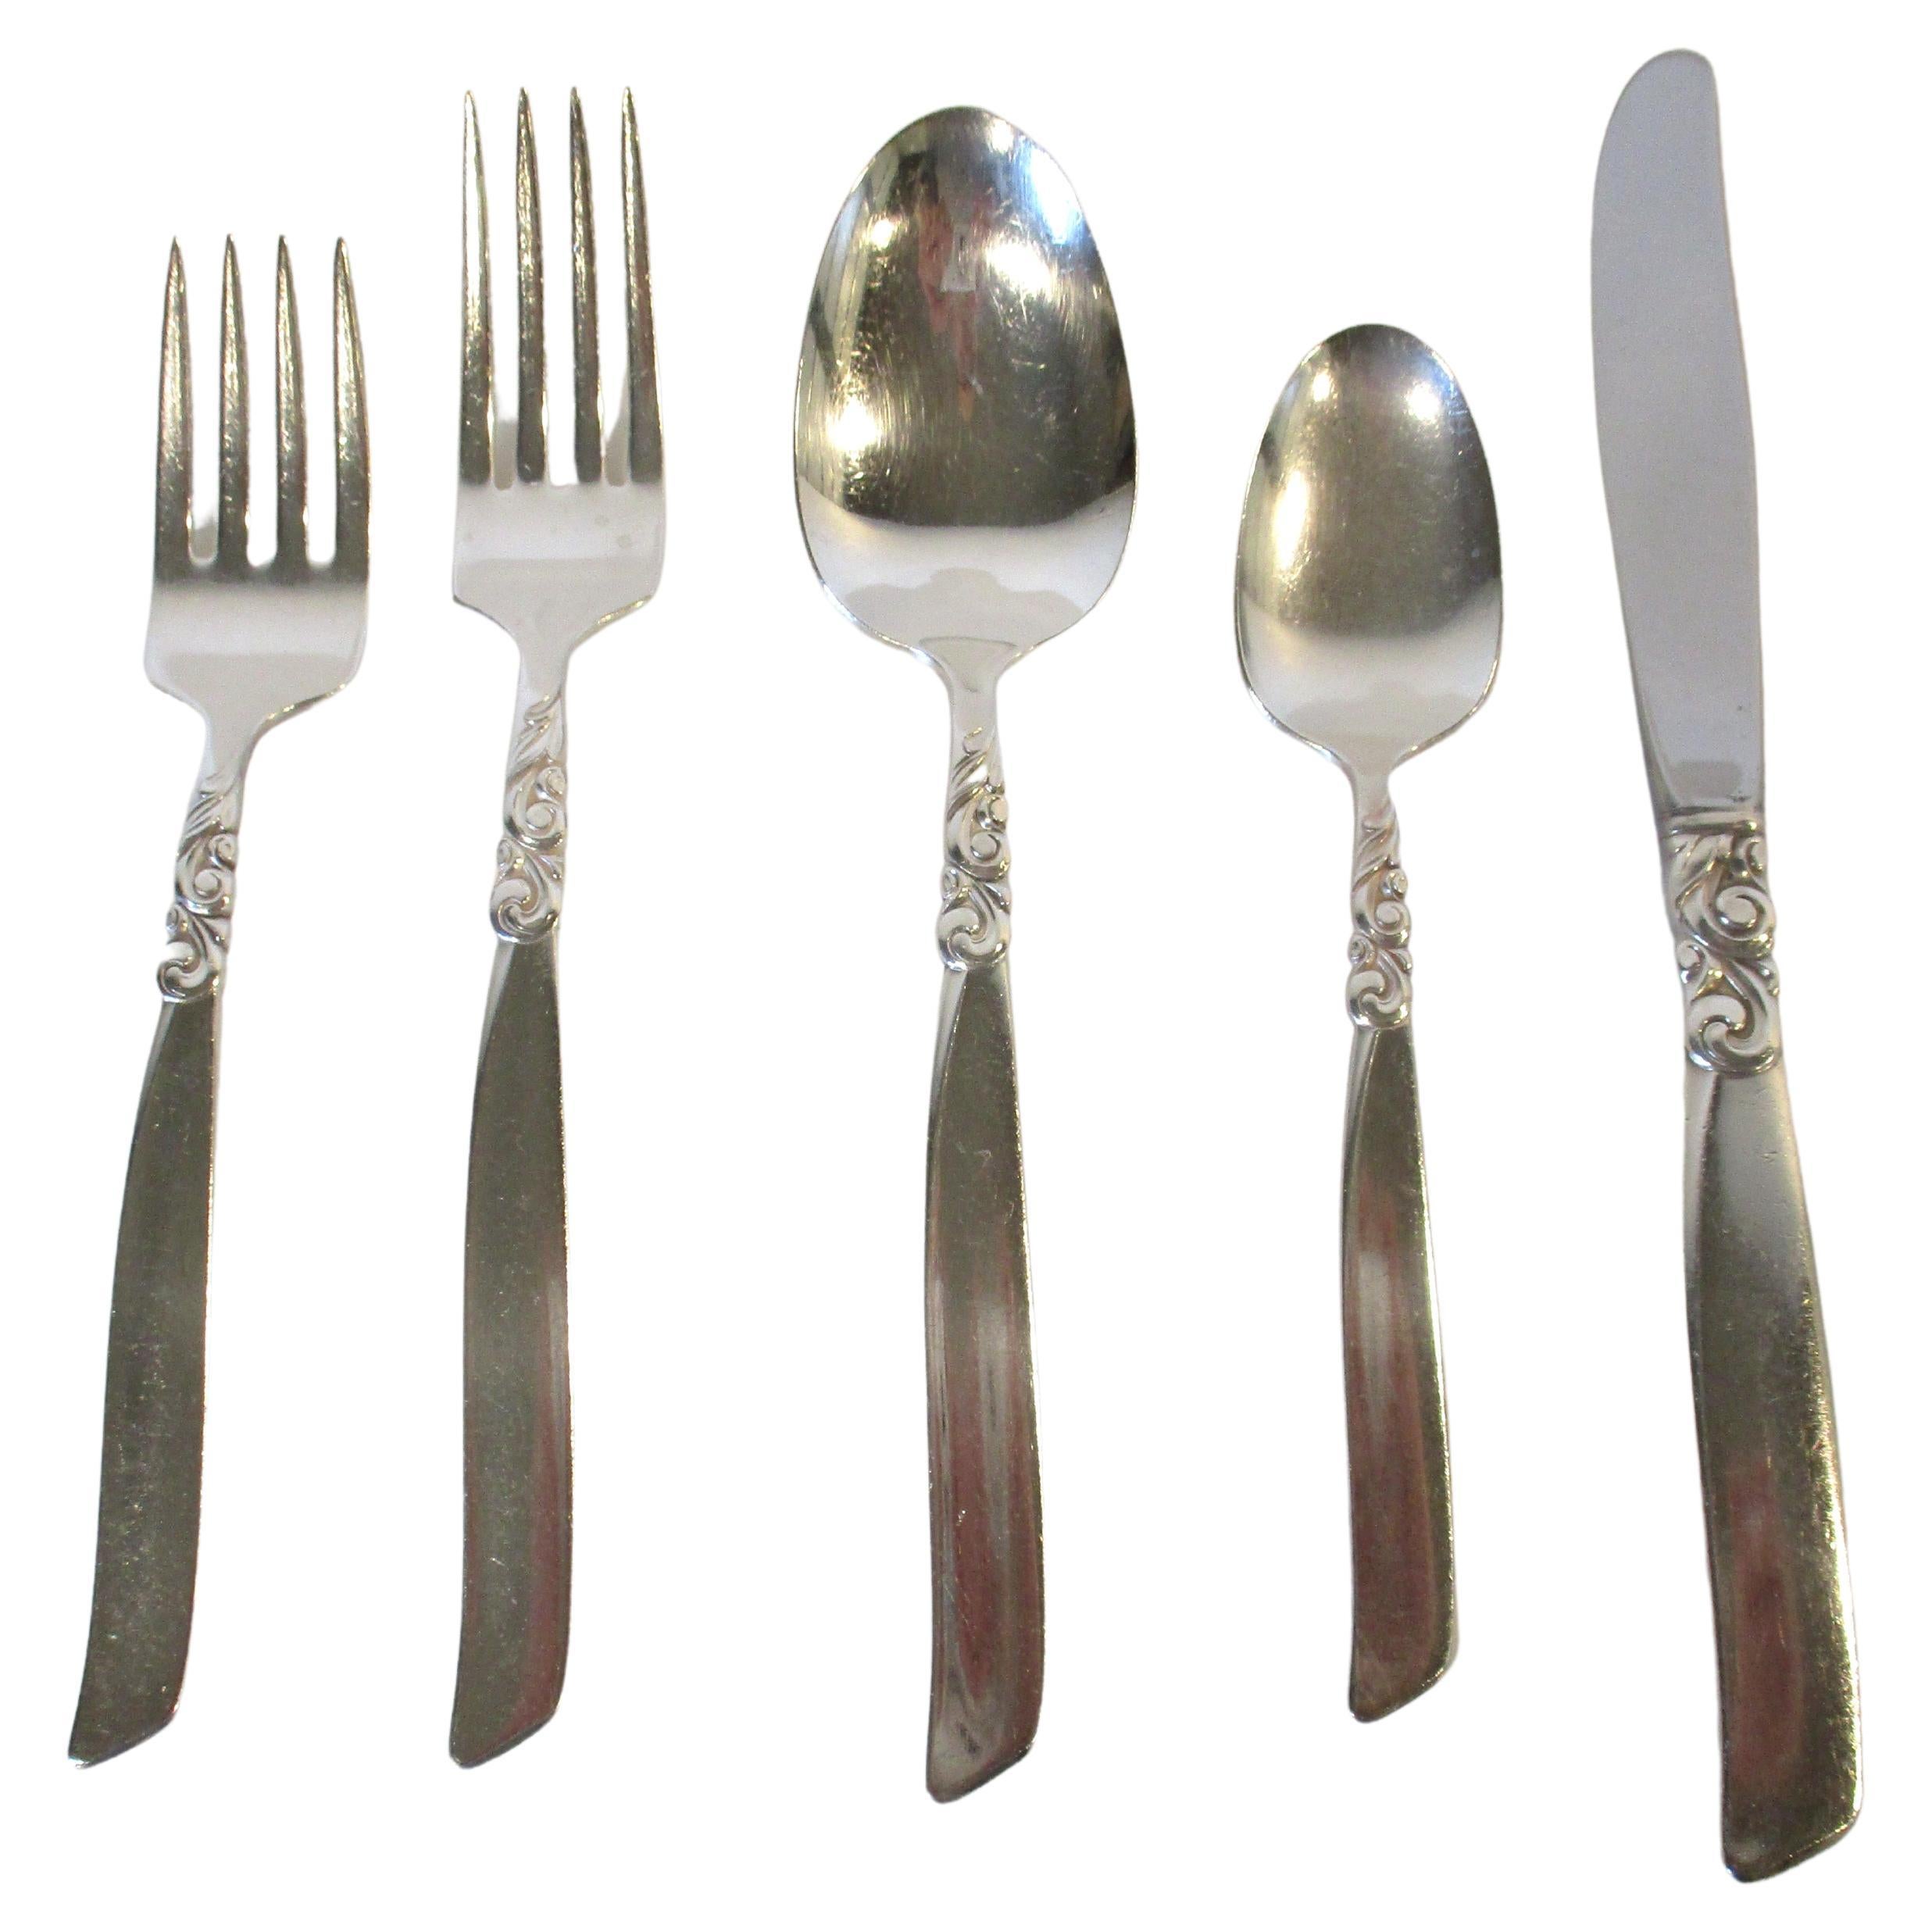 DAYTON Reed Barton 60pc Set Service for 12 Stainless Flatware Place Setting 